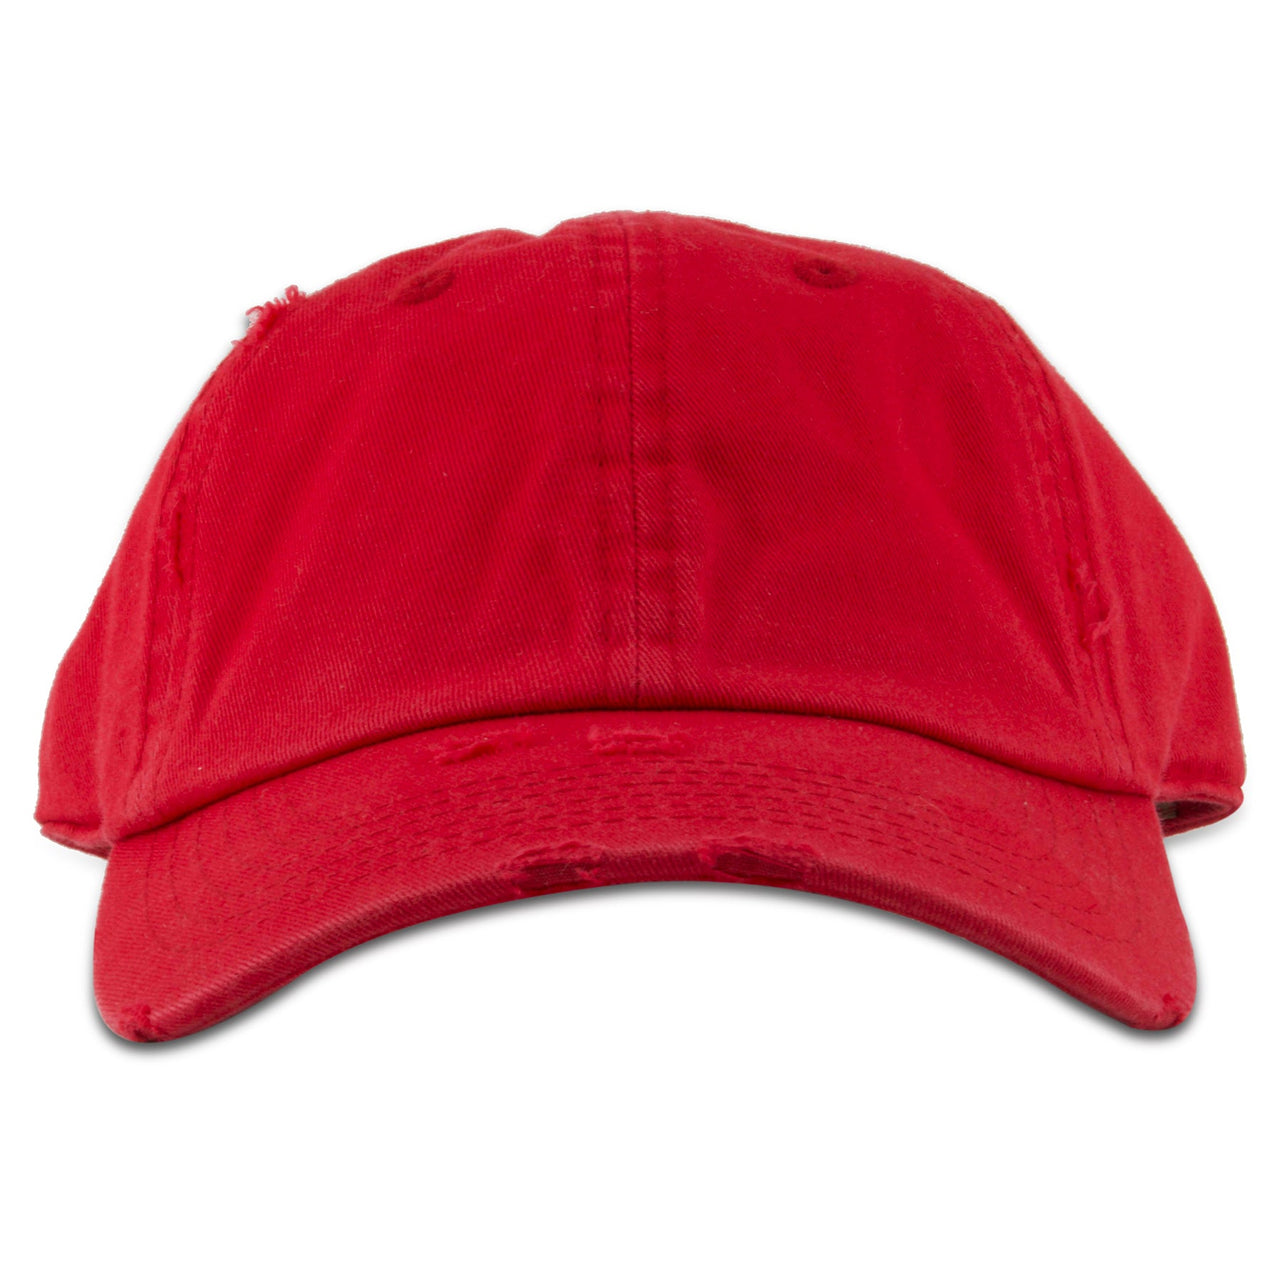 The red youth blank distressed dad hat has a soft crown and a bent brim